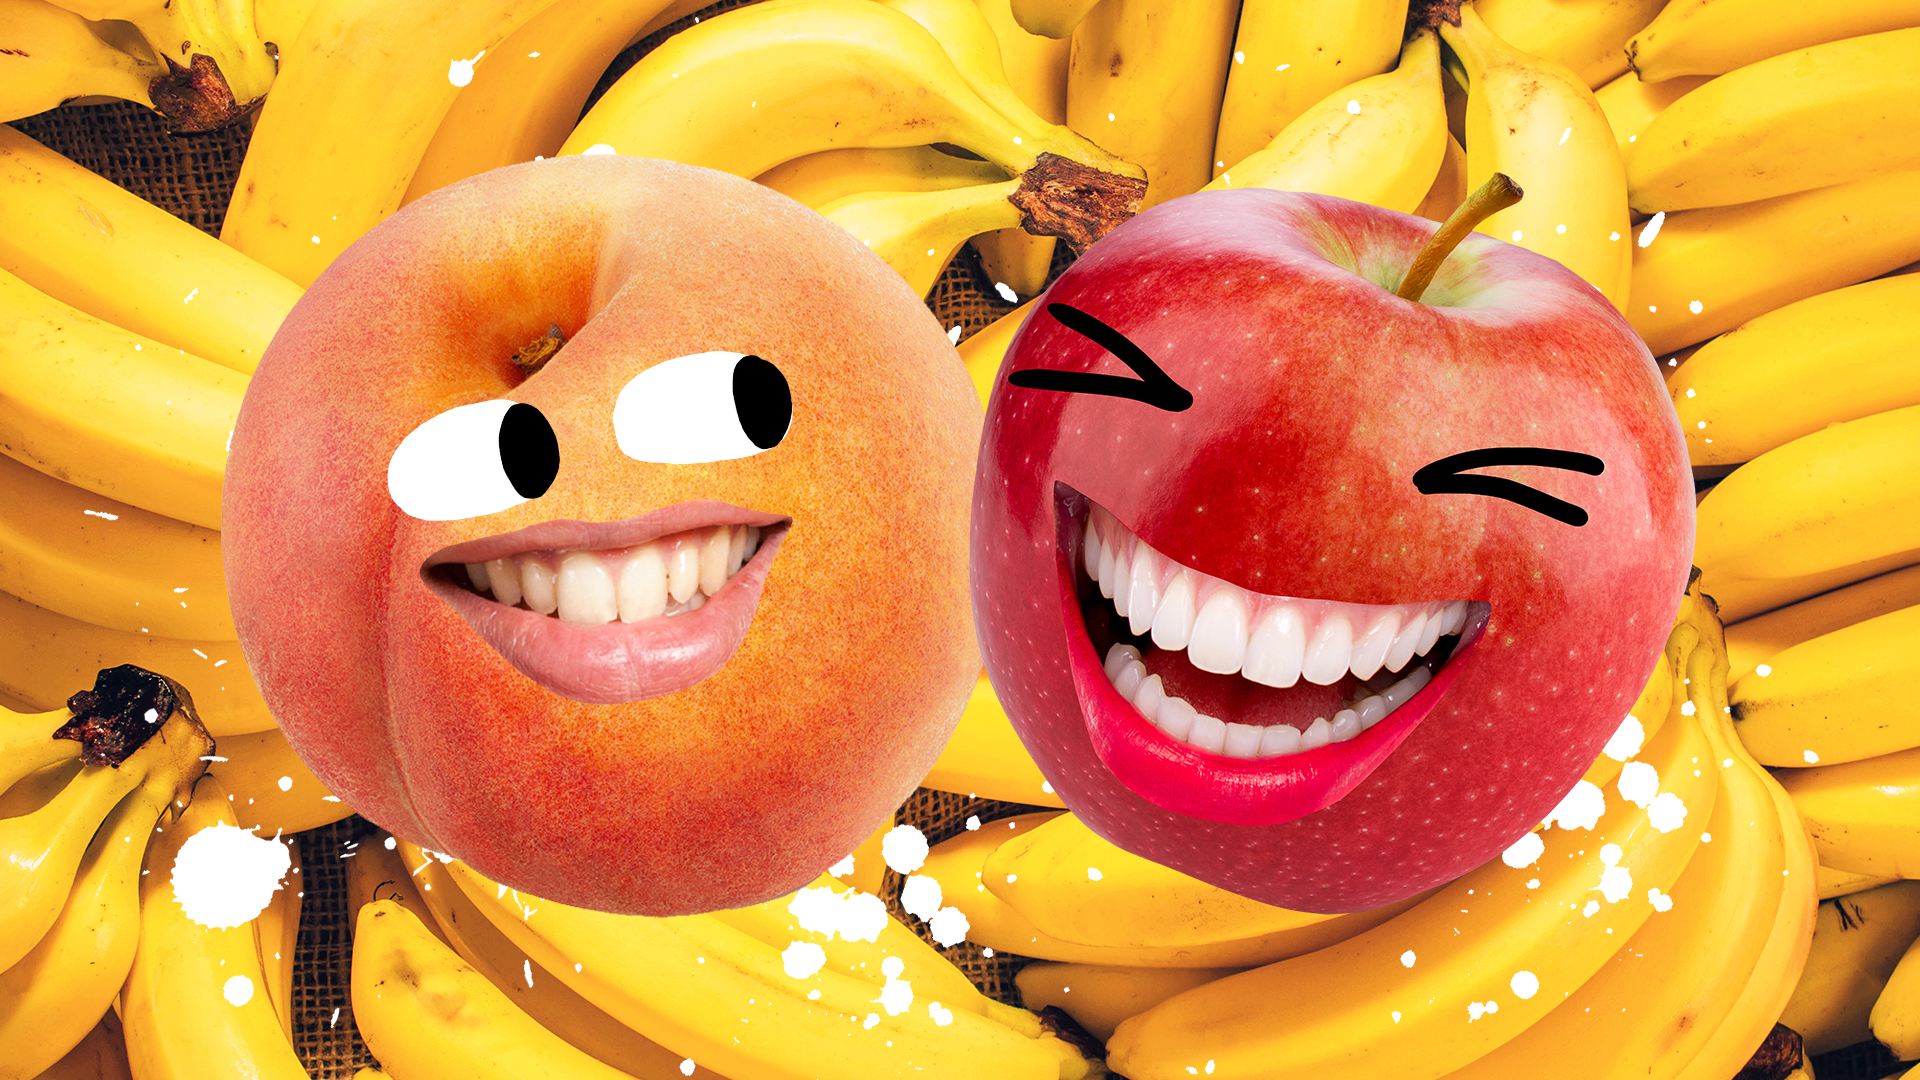 Two pieces of fruit, who are also friends